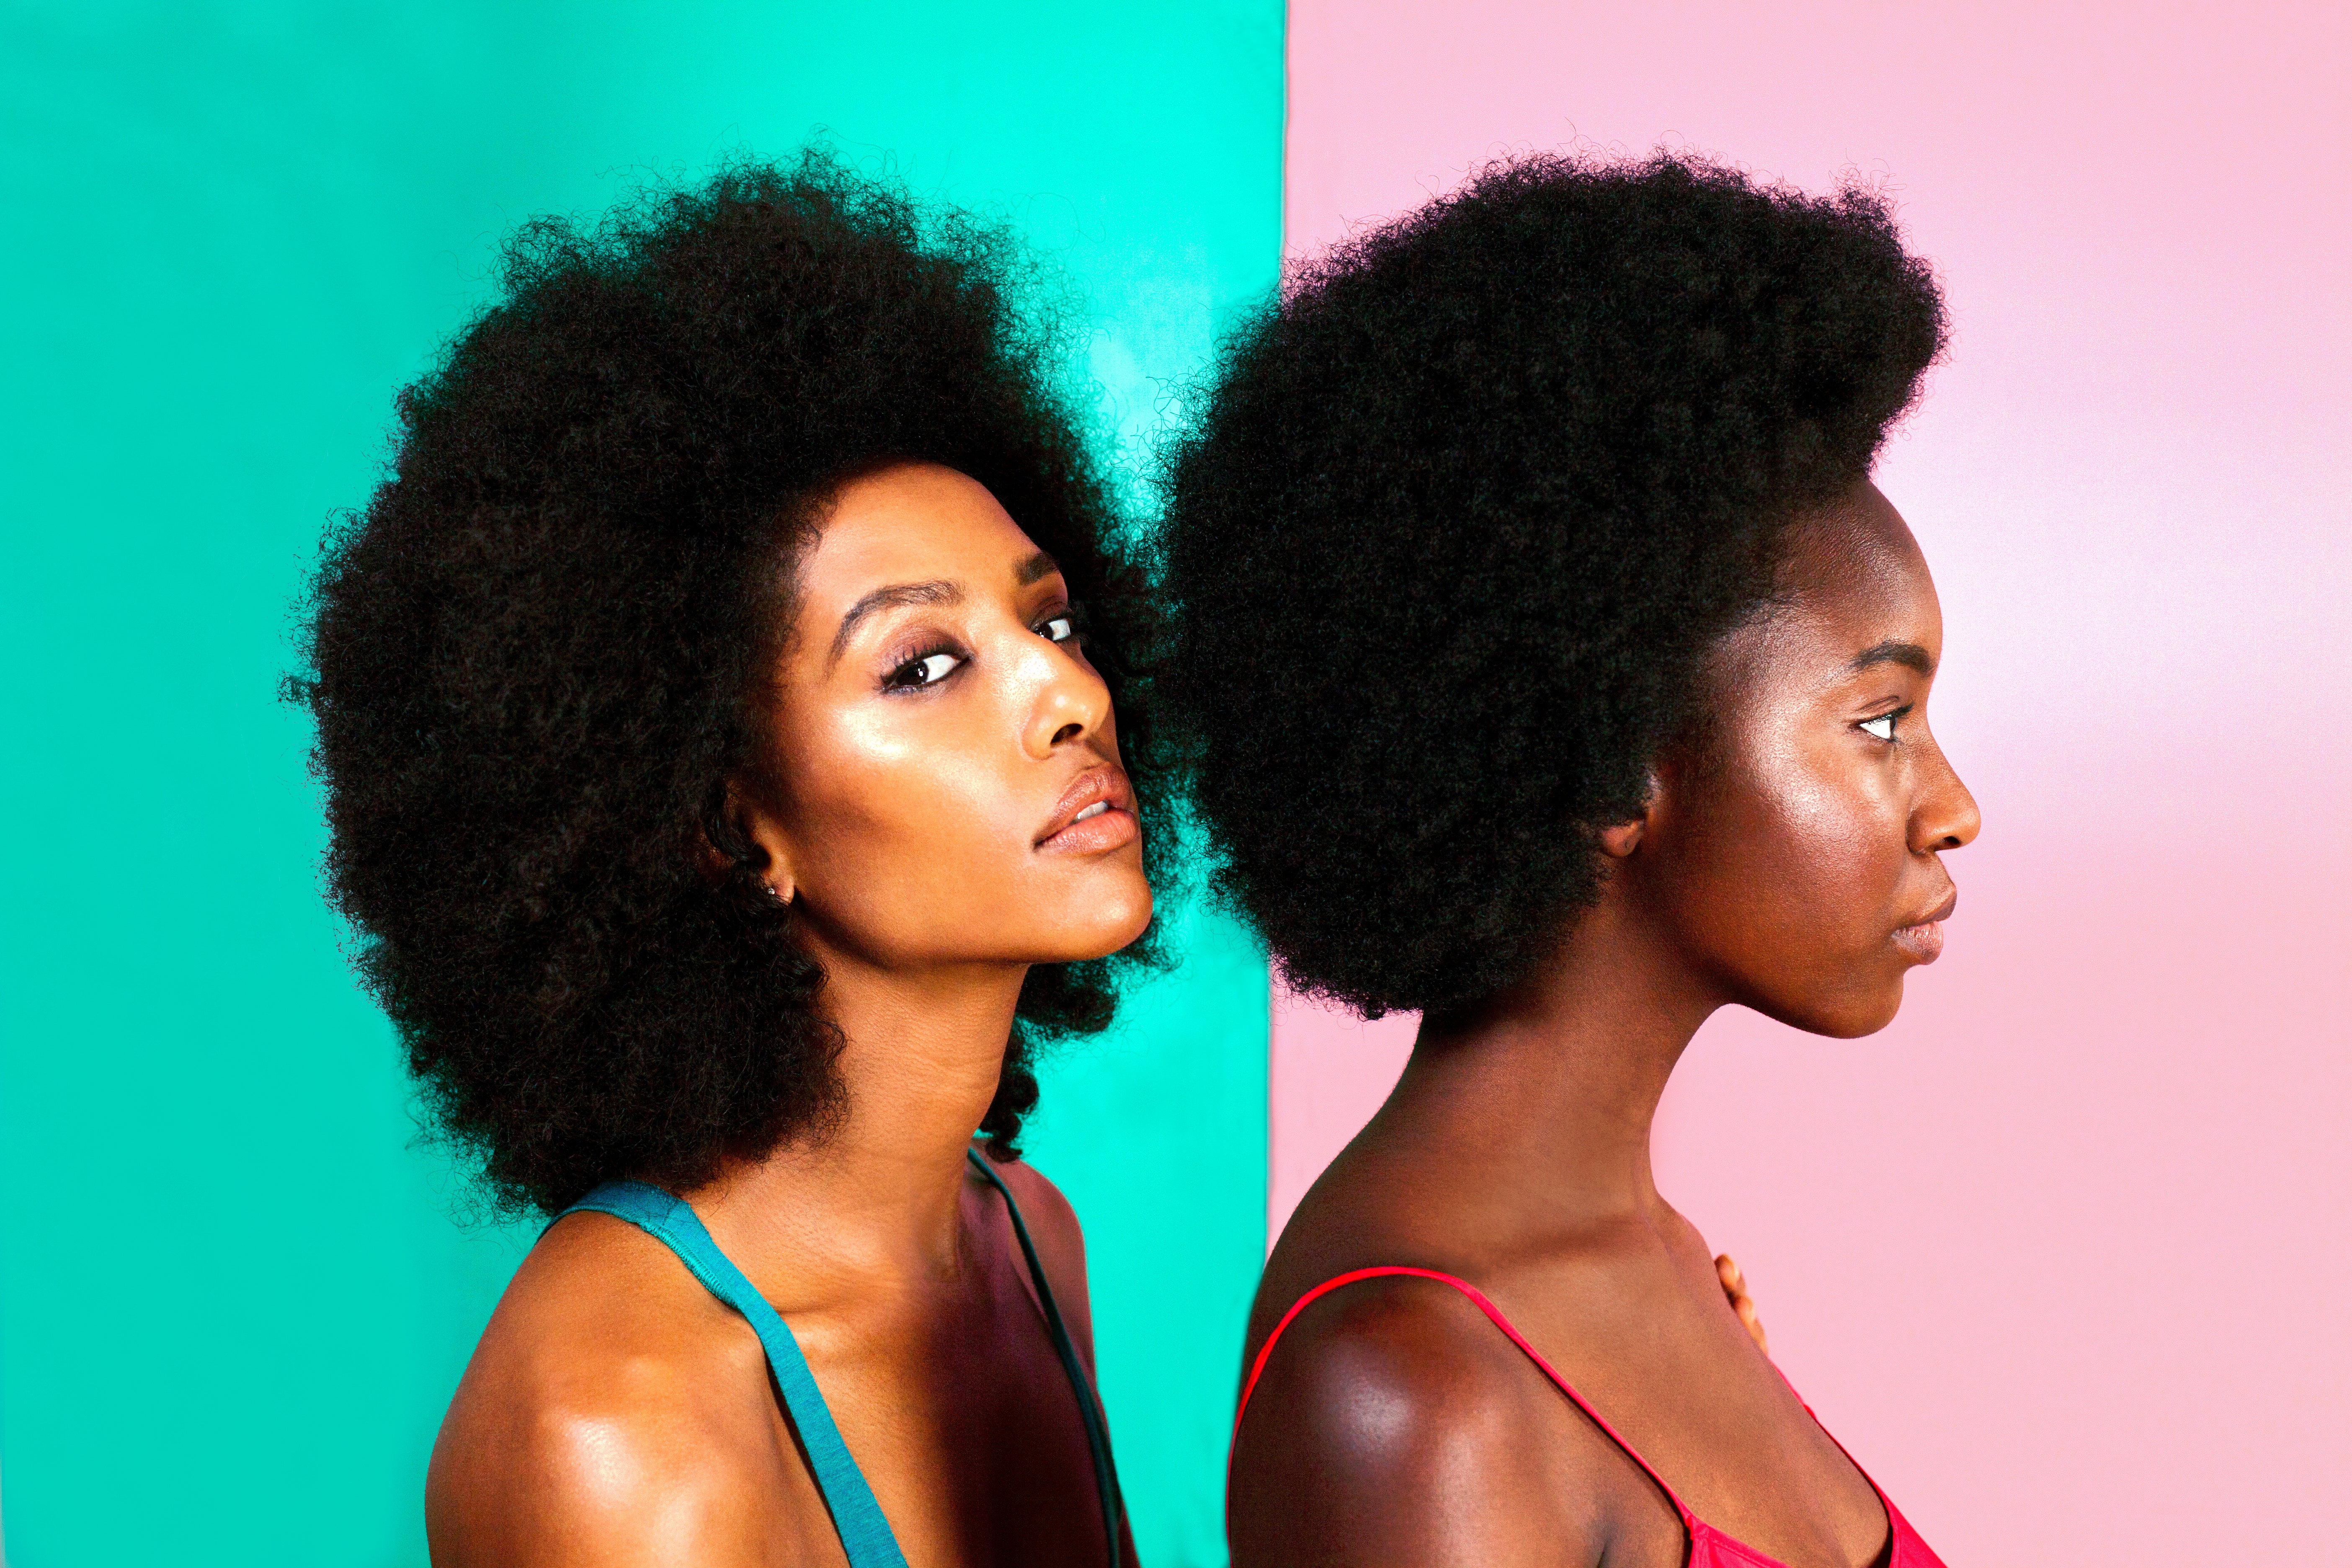 7 Castor Oil-Infused Products To Try If You're Obsessed With Hair Growth
